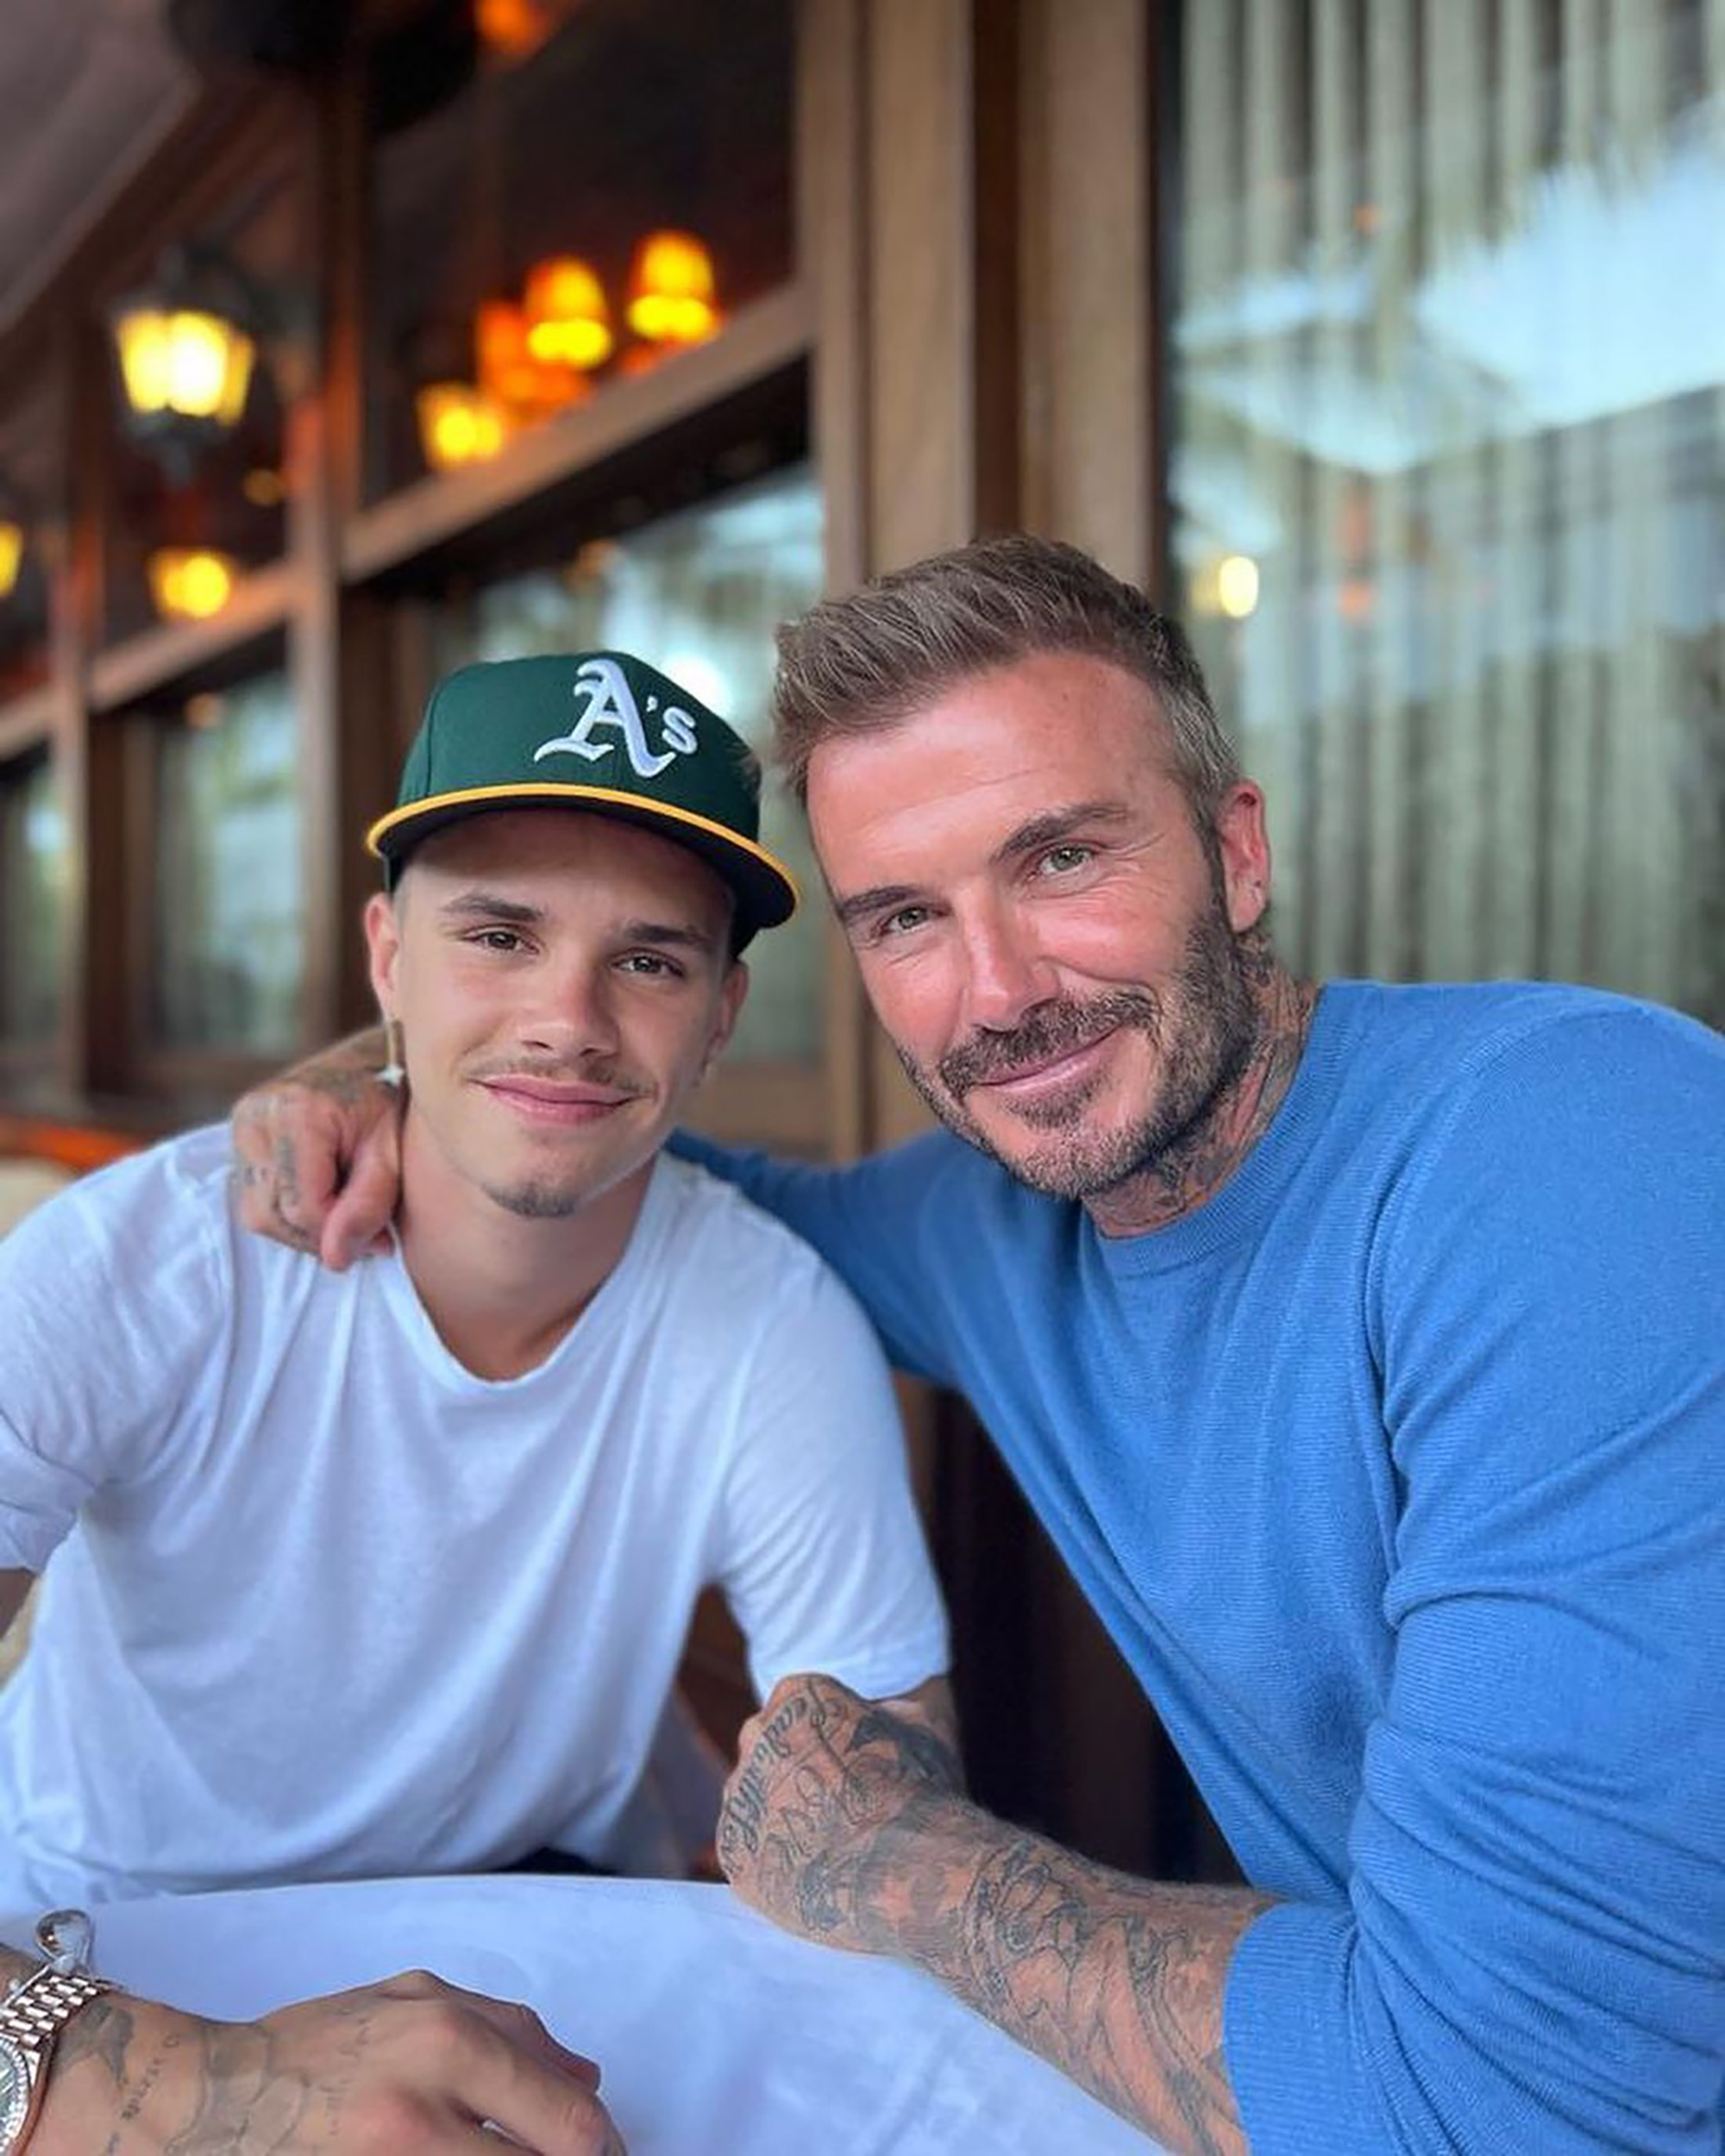 David Beckham spends time with his son Romeo for his birthday.